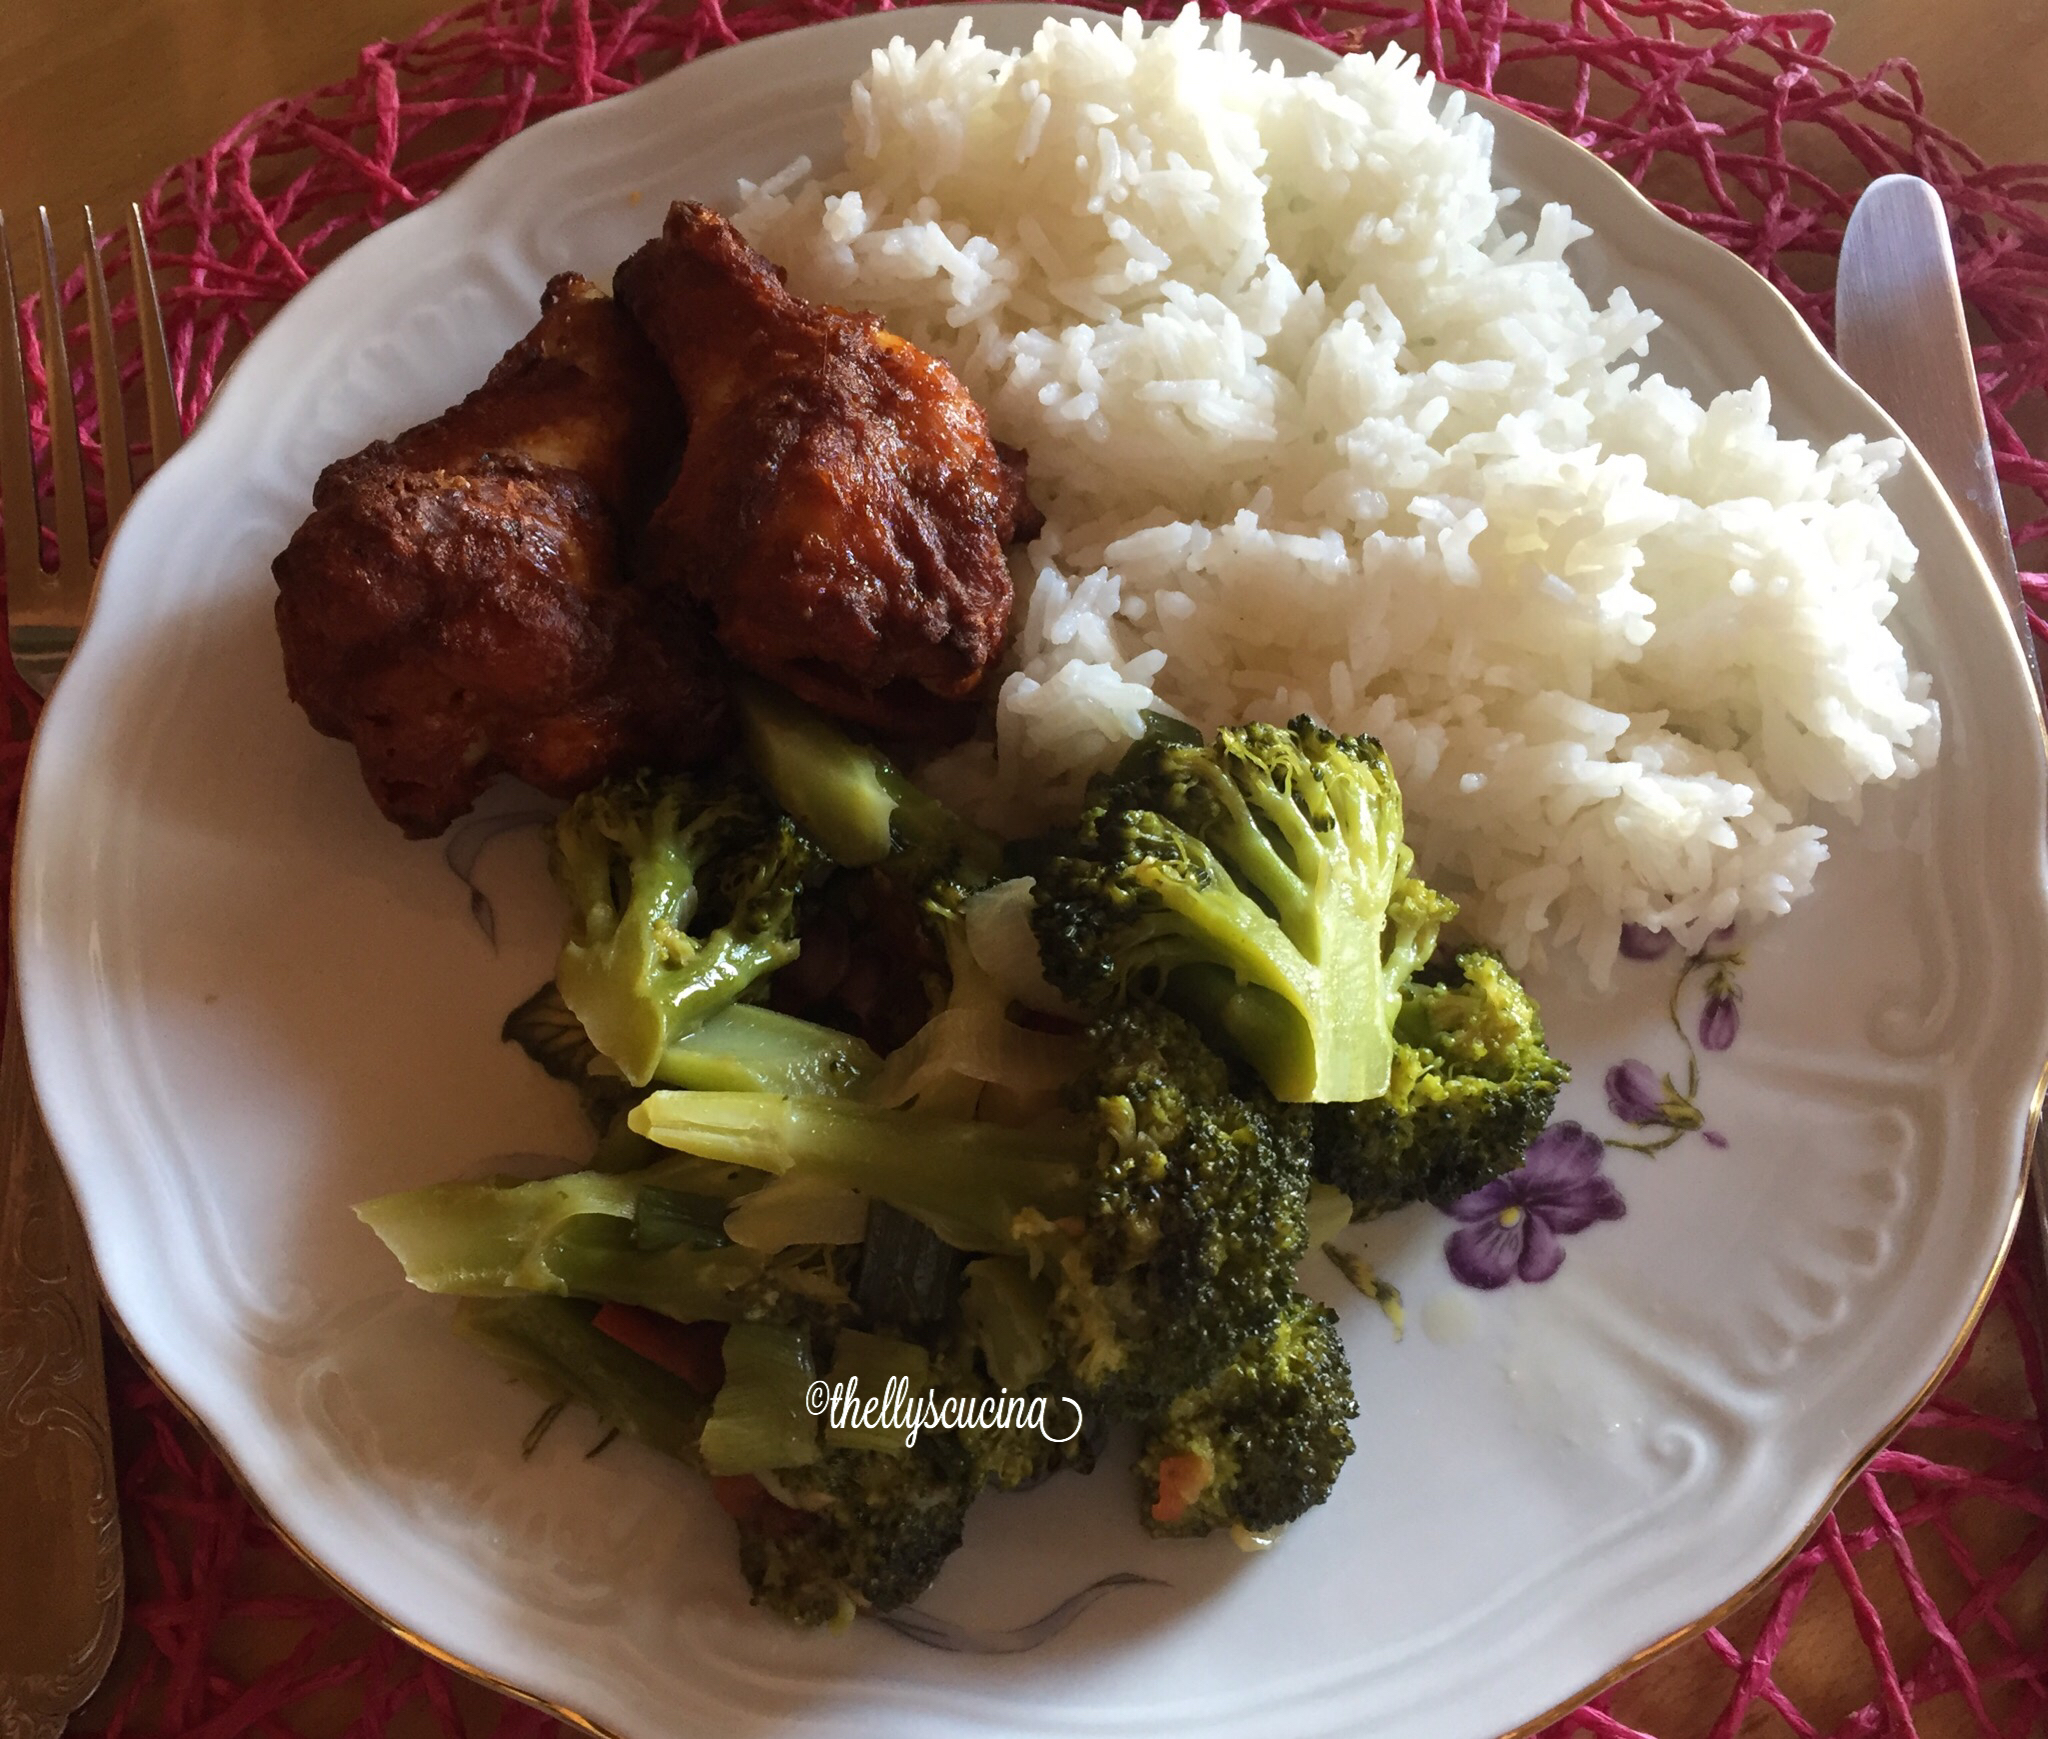 Boiled rice, baked chicken and broccoli stir fried 